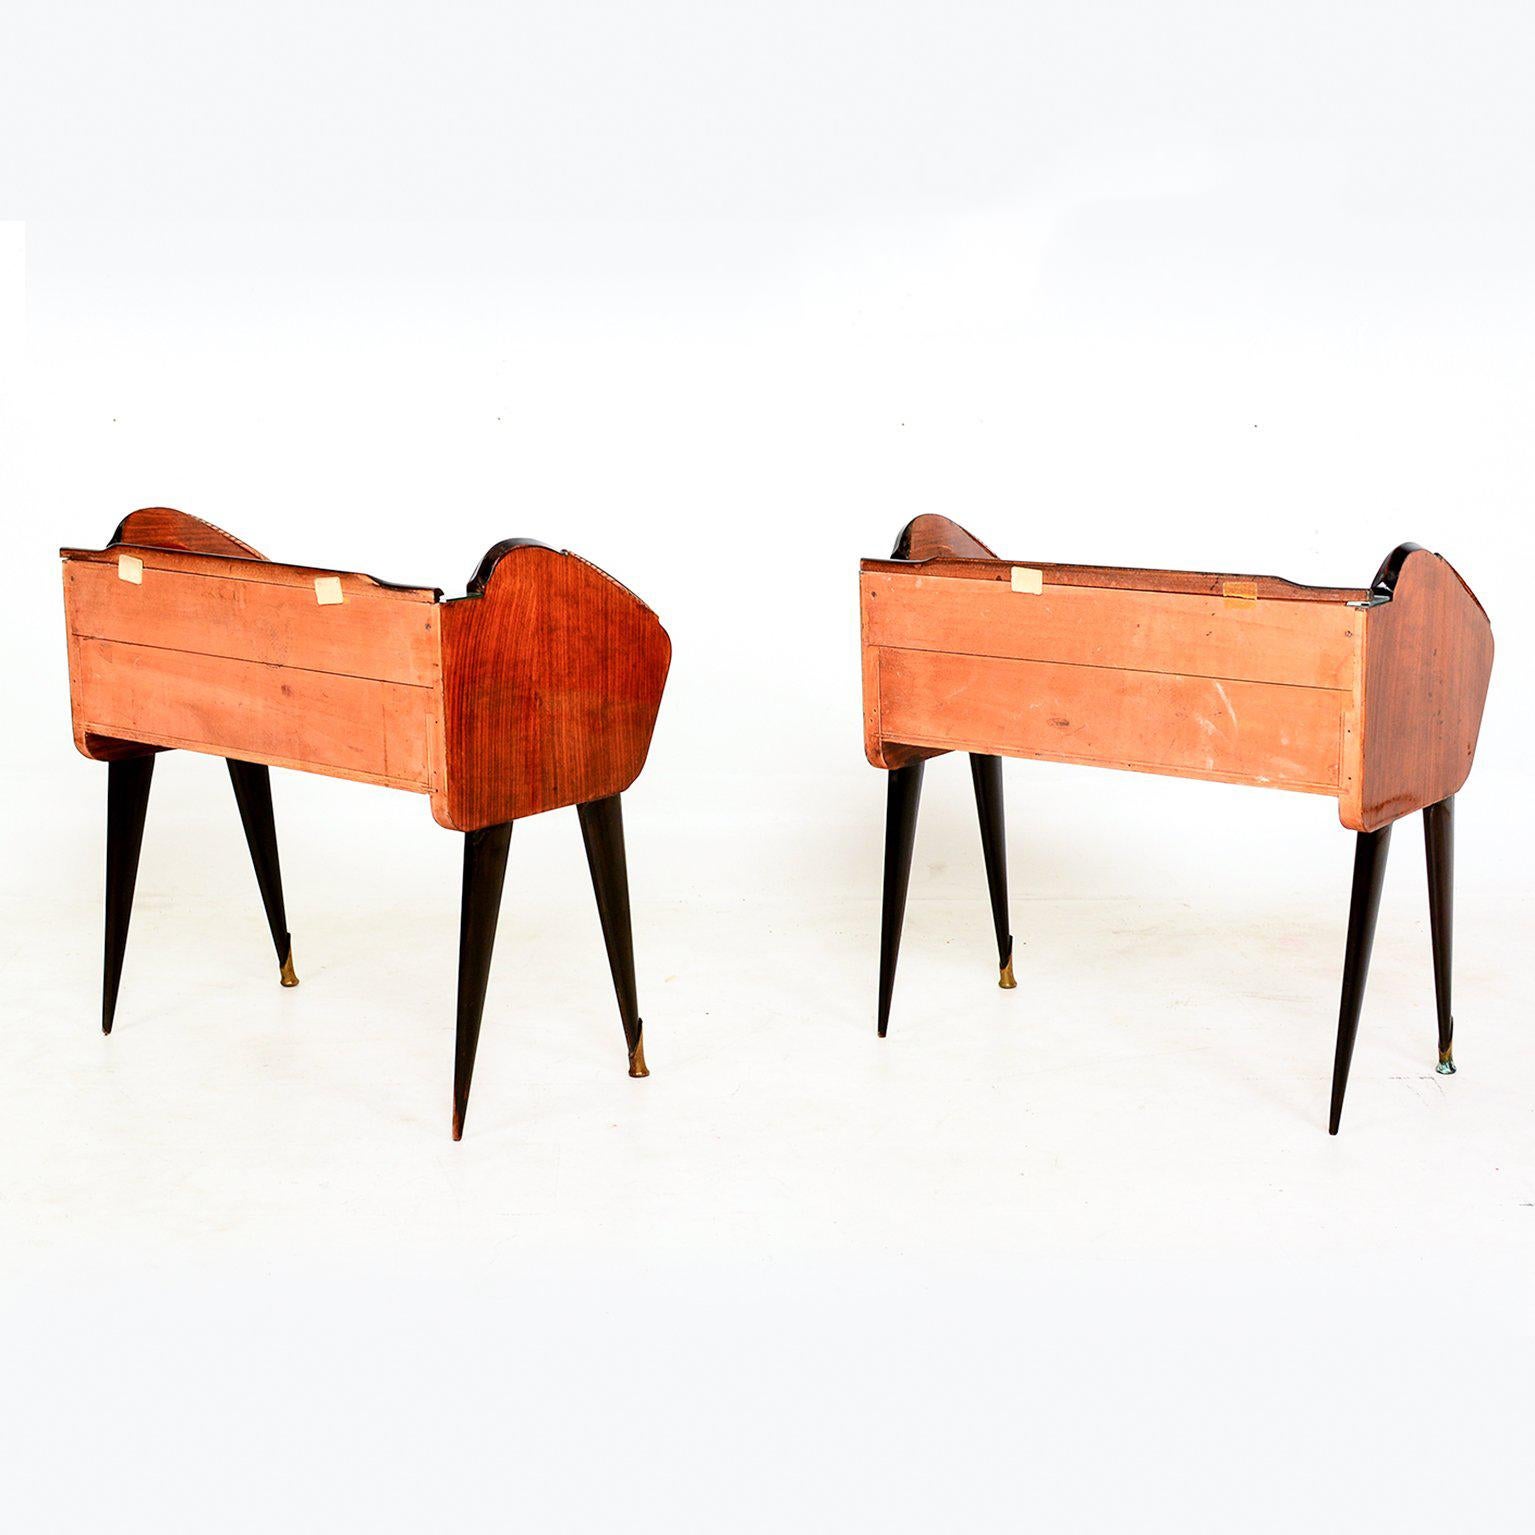 Italian Mid Century Modern  Pair of Rosewood Nightstands Bed Side Tables Made in Italy